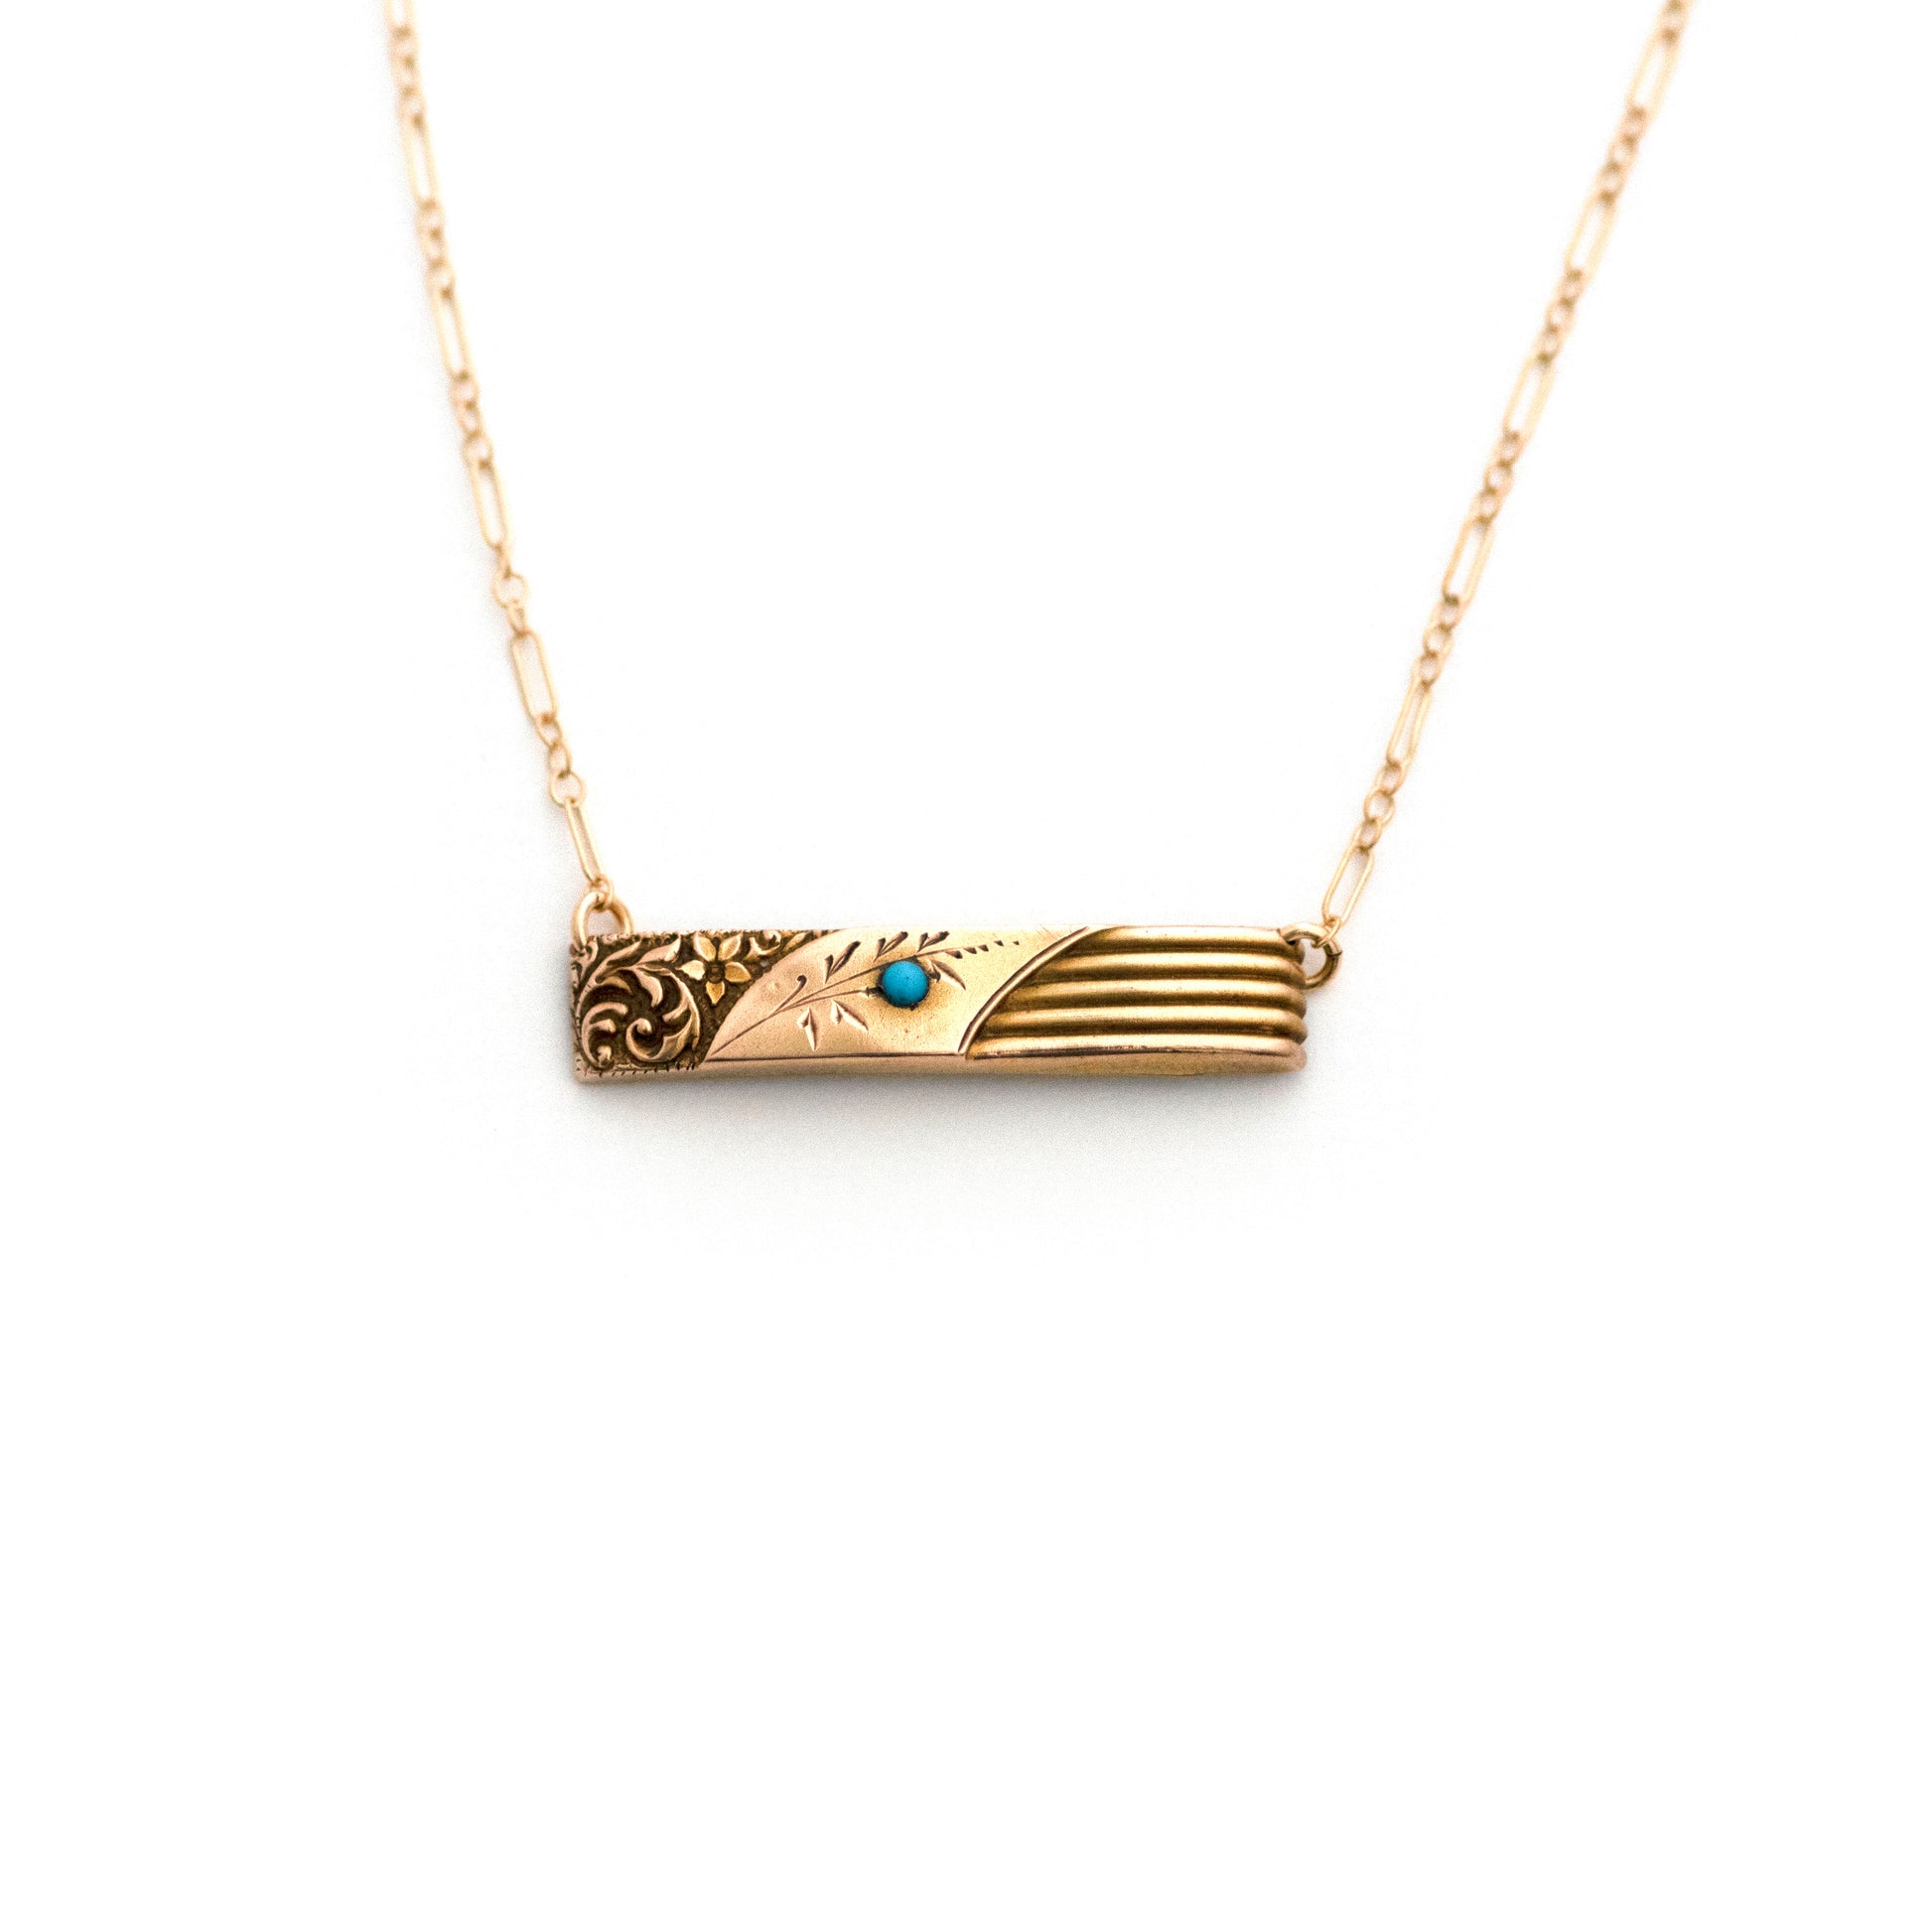 This one-of-a-kind conversion necklace is made up of:  Solid 10k gold Victorian bar pin pendant from the late 1800s with hand tooled details and a turquoise stone accent.